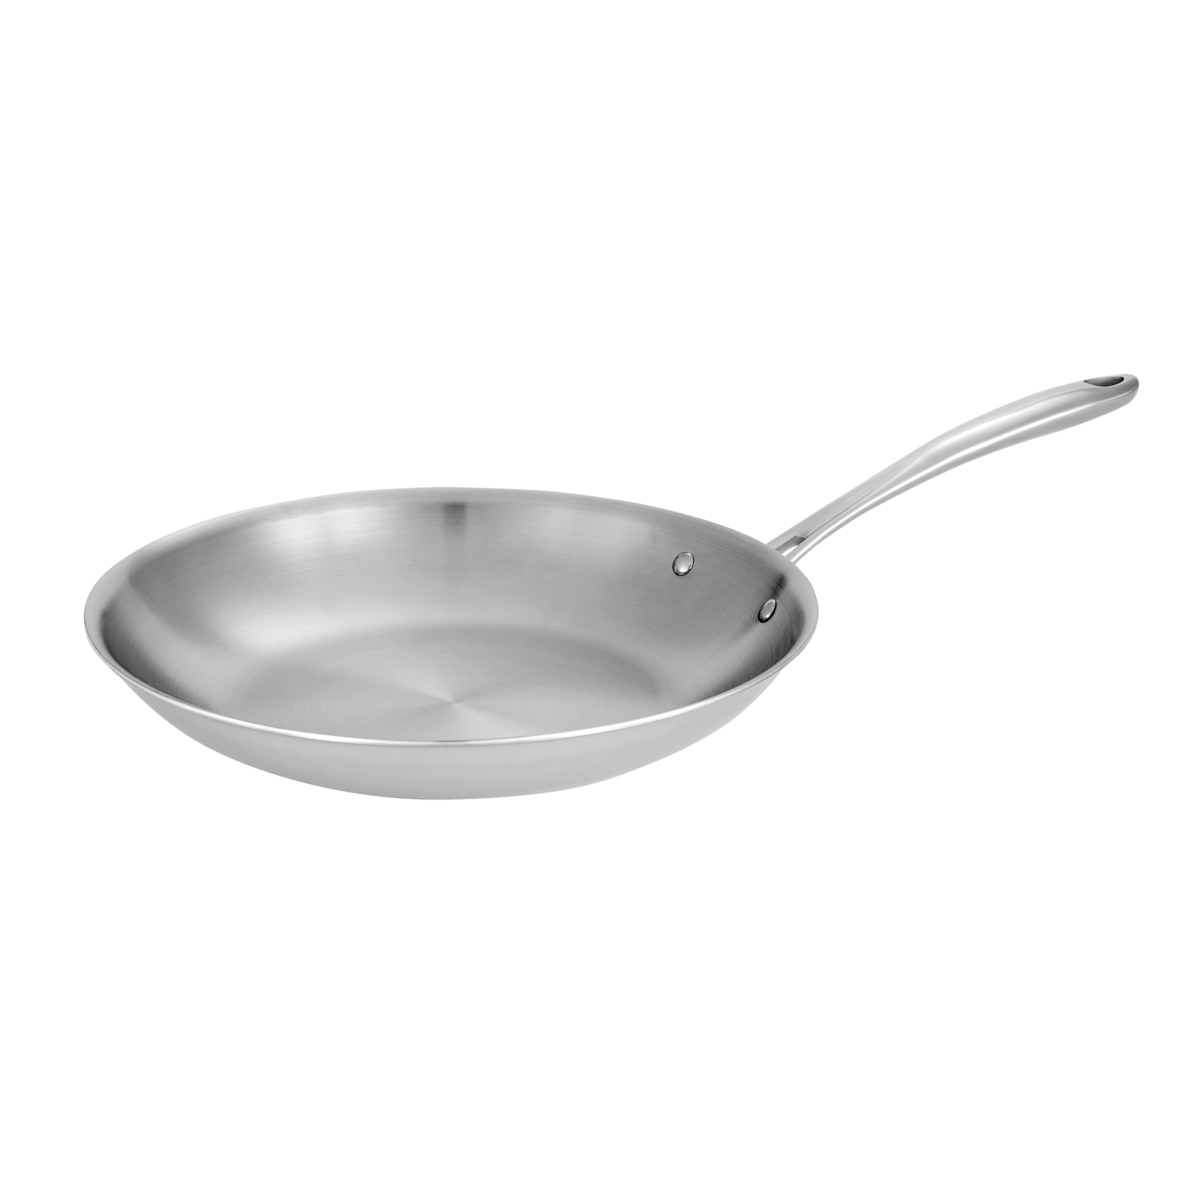 Tramontina Tri-Ply Clad Stainless Steel Fry Pan, Multiple Sizes